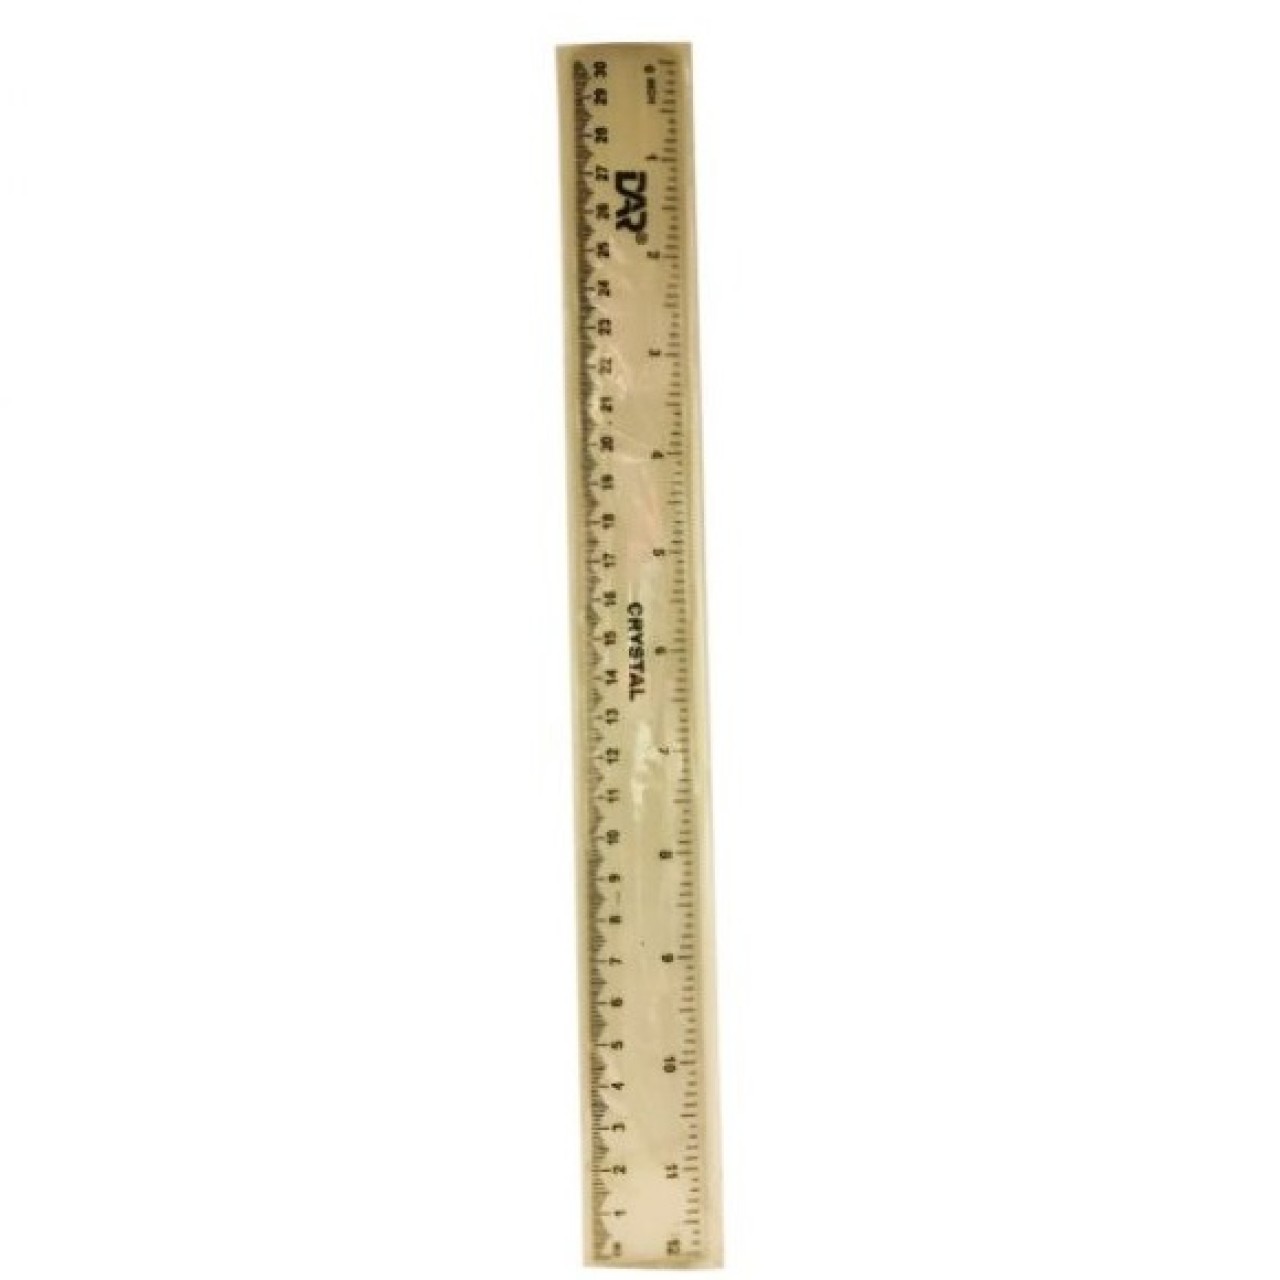 Large Measurement Crystal Ruler - Size 12-Inches/30 Cm - Transparent White